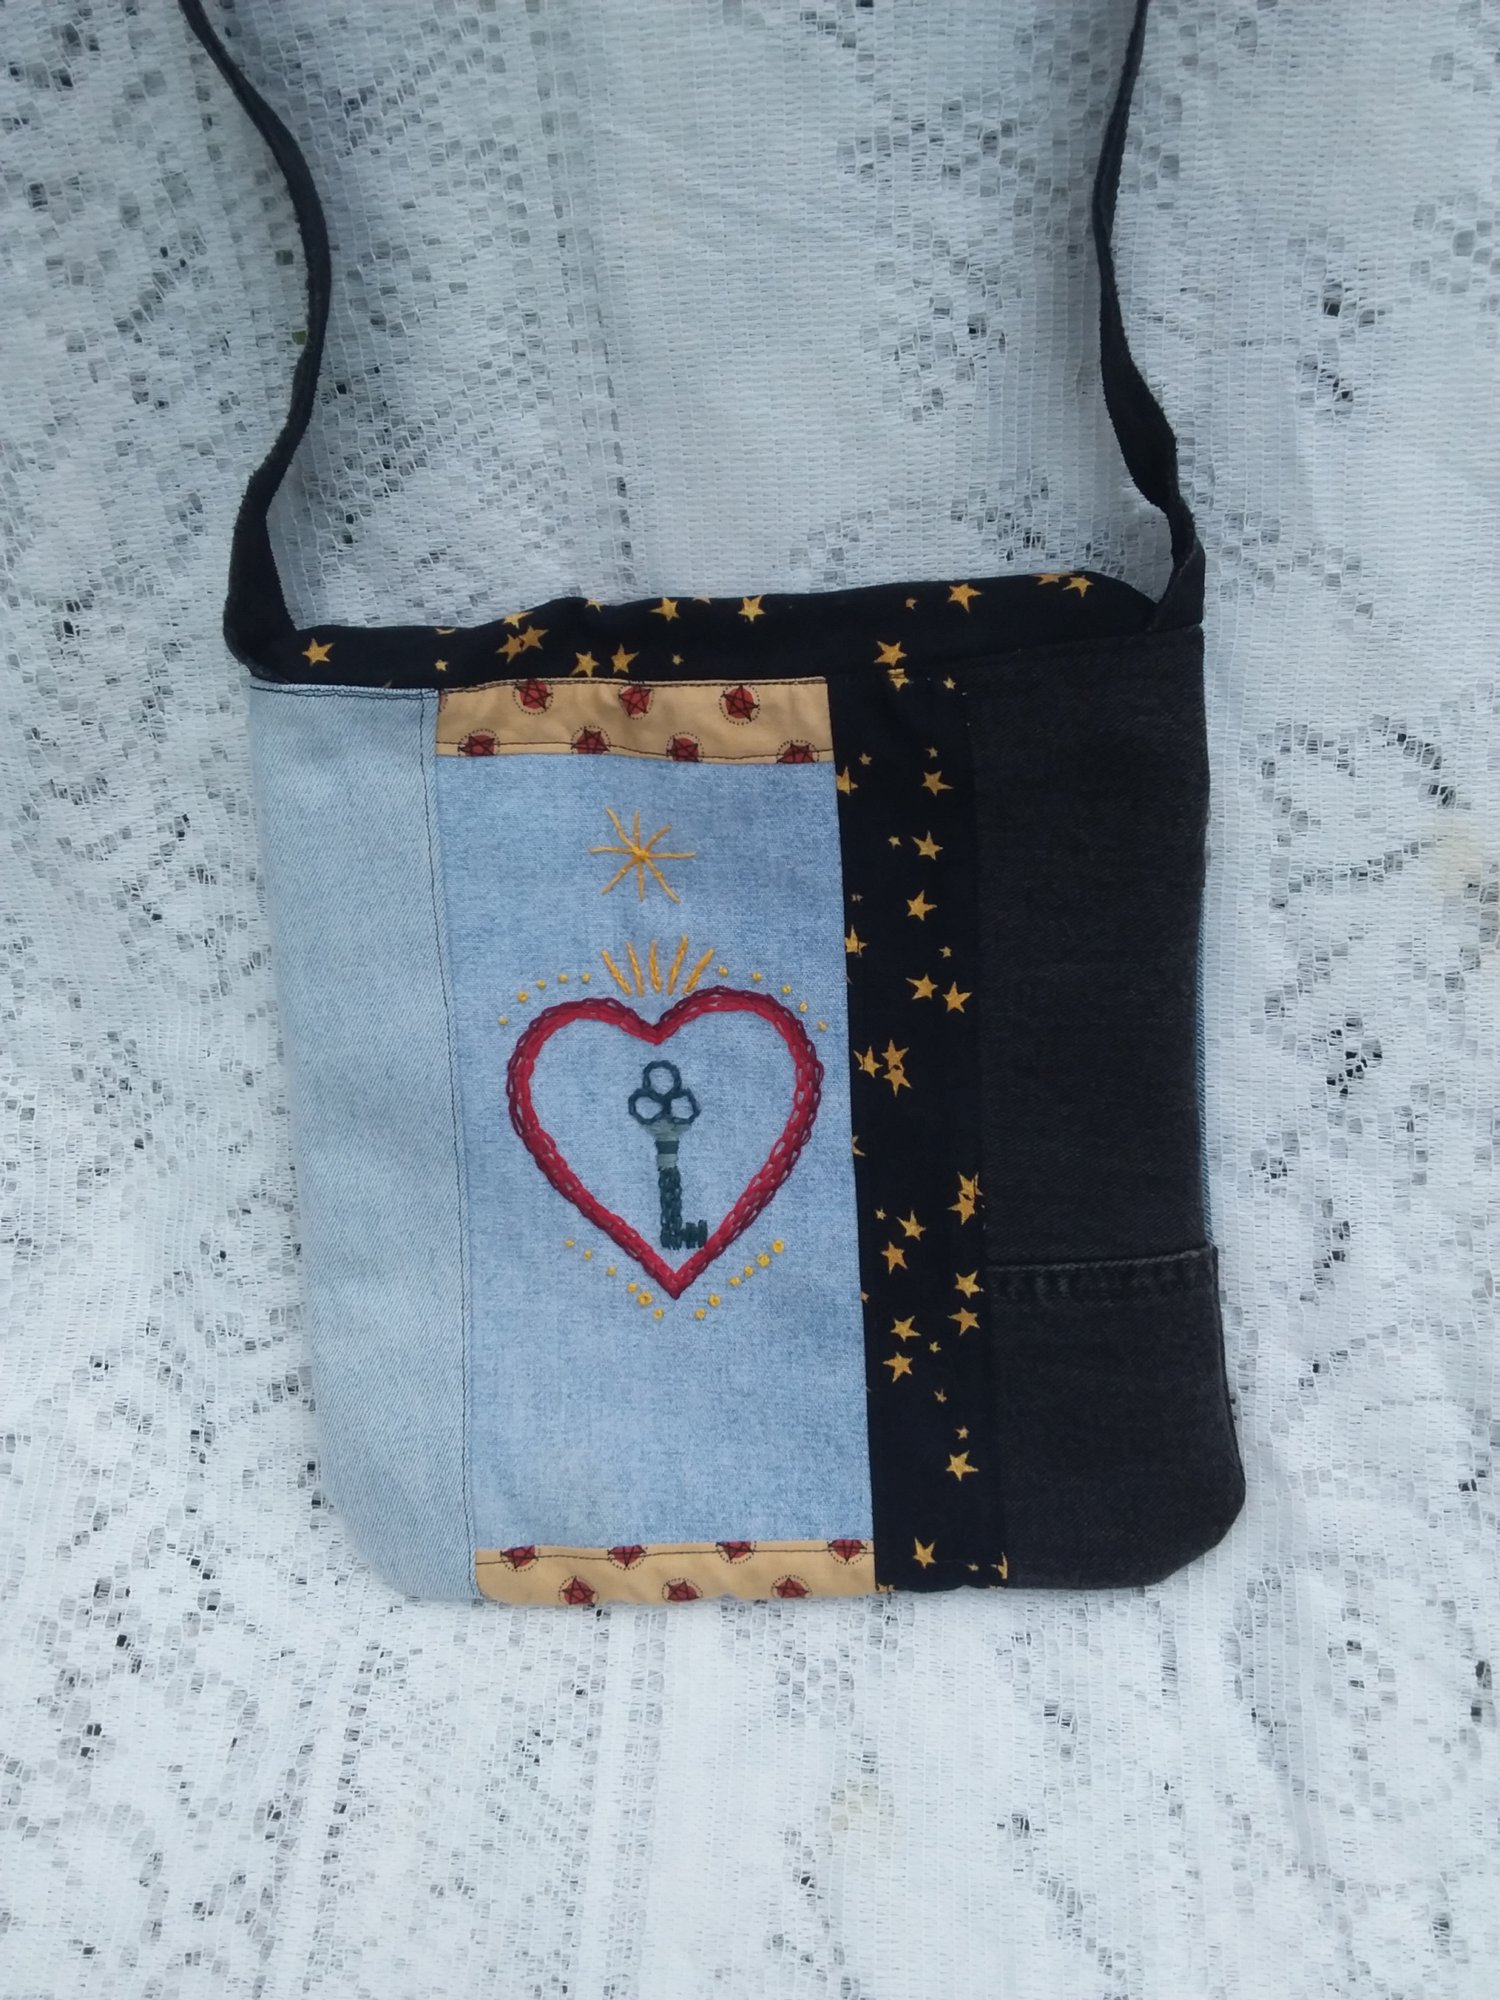 Denim and Star Fabric messenger bag with embroidered sacred heart design —  Magic Threads Studio